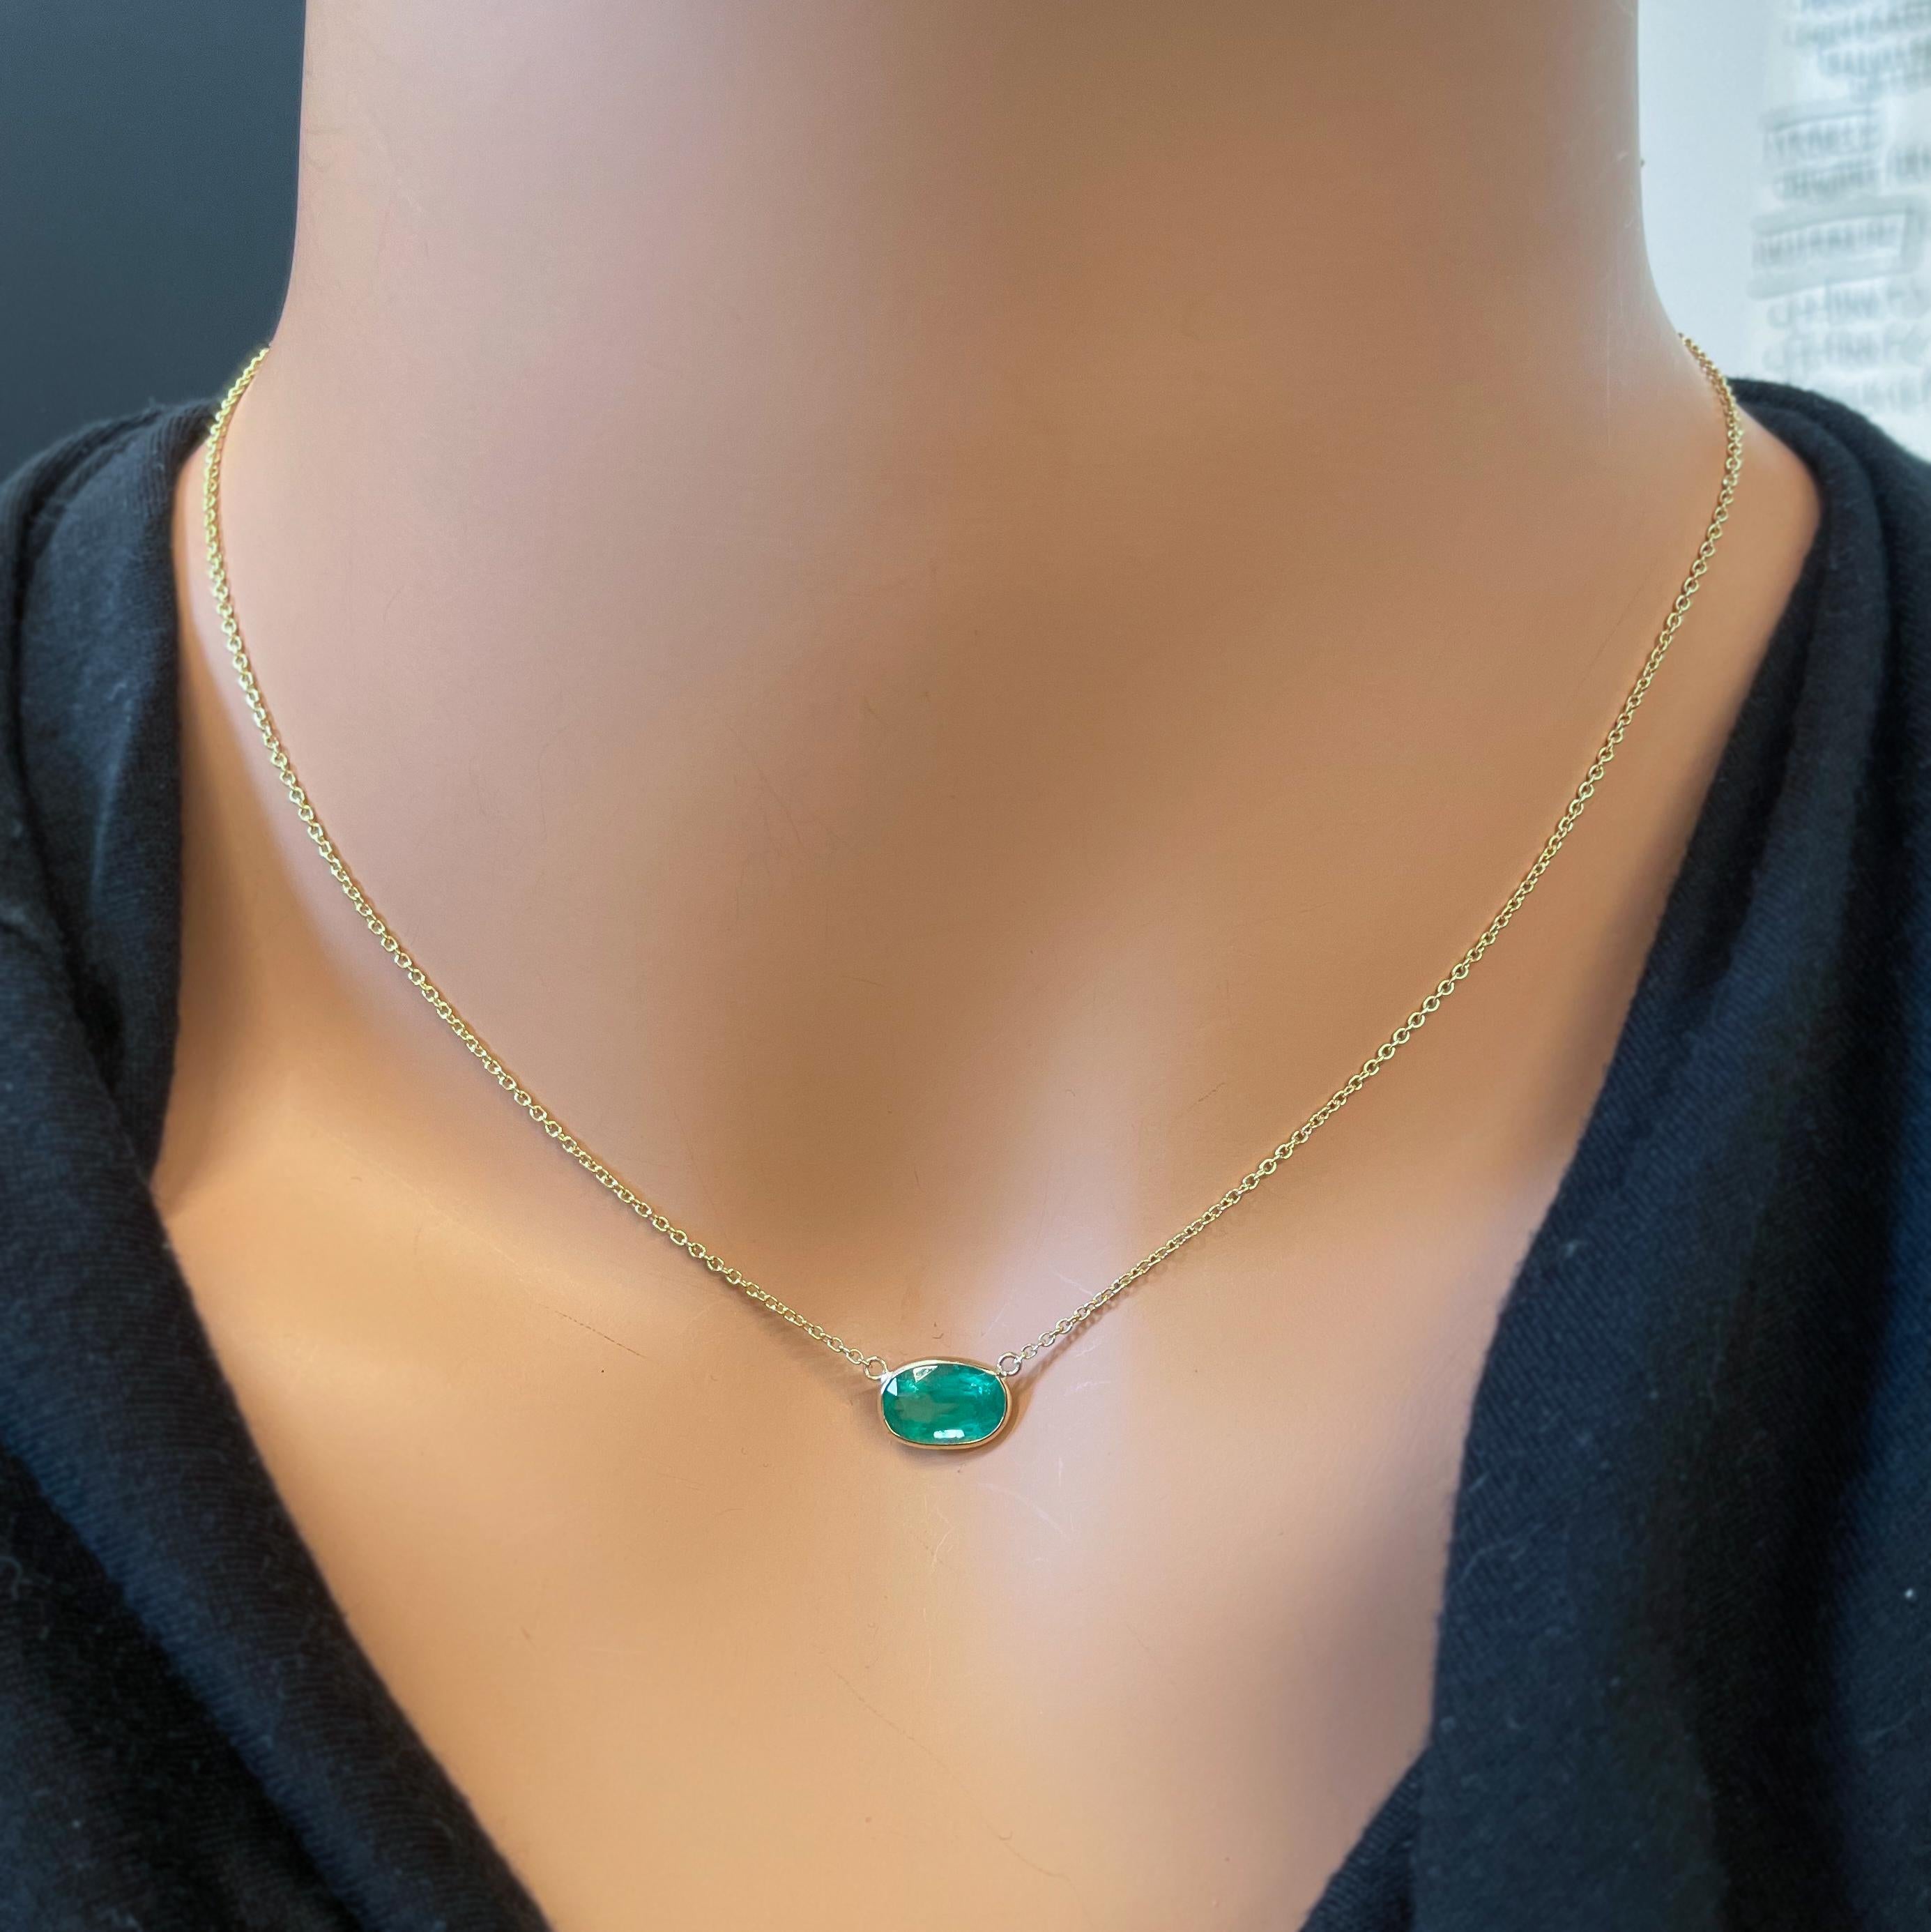 Contemporary 1.98 Carat Green Emerald Oval Cut Fashion Necklaces In 14K Yellow Gold For Sale